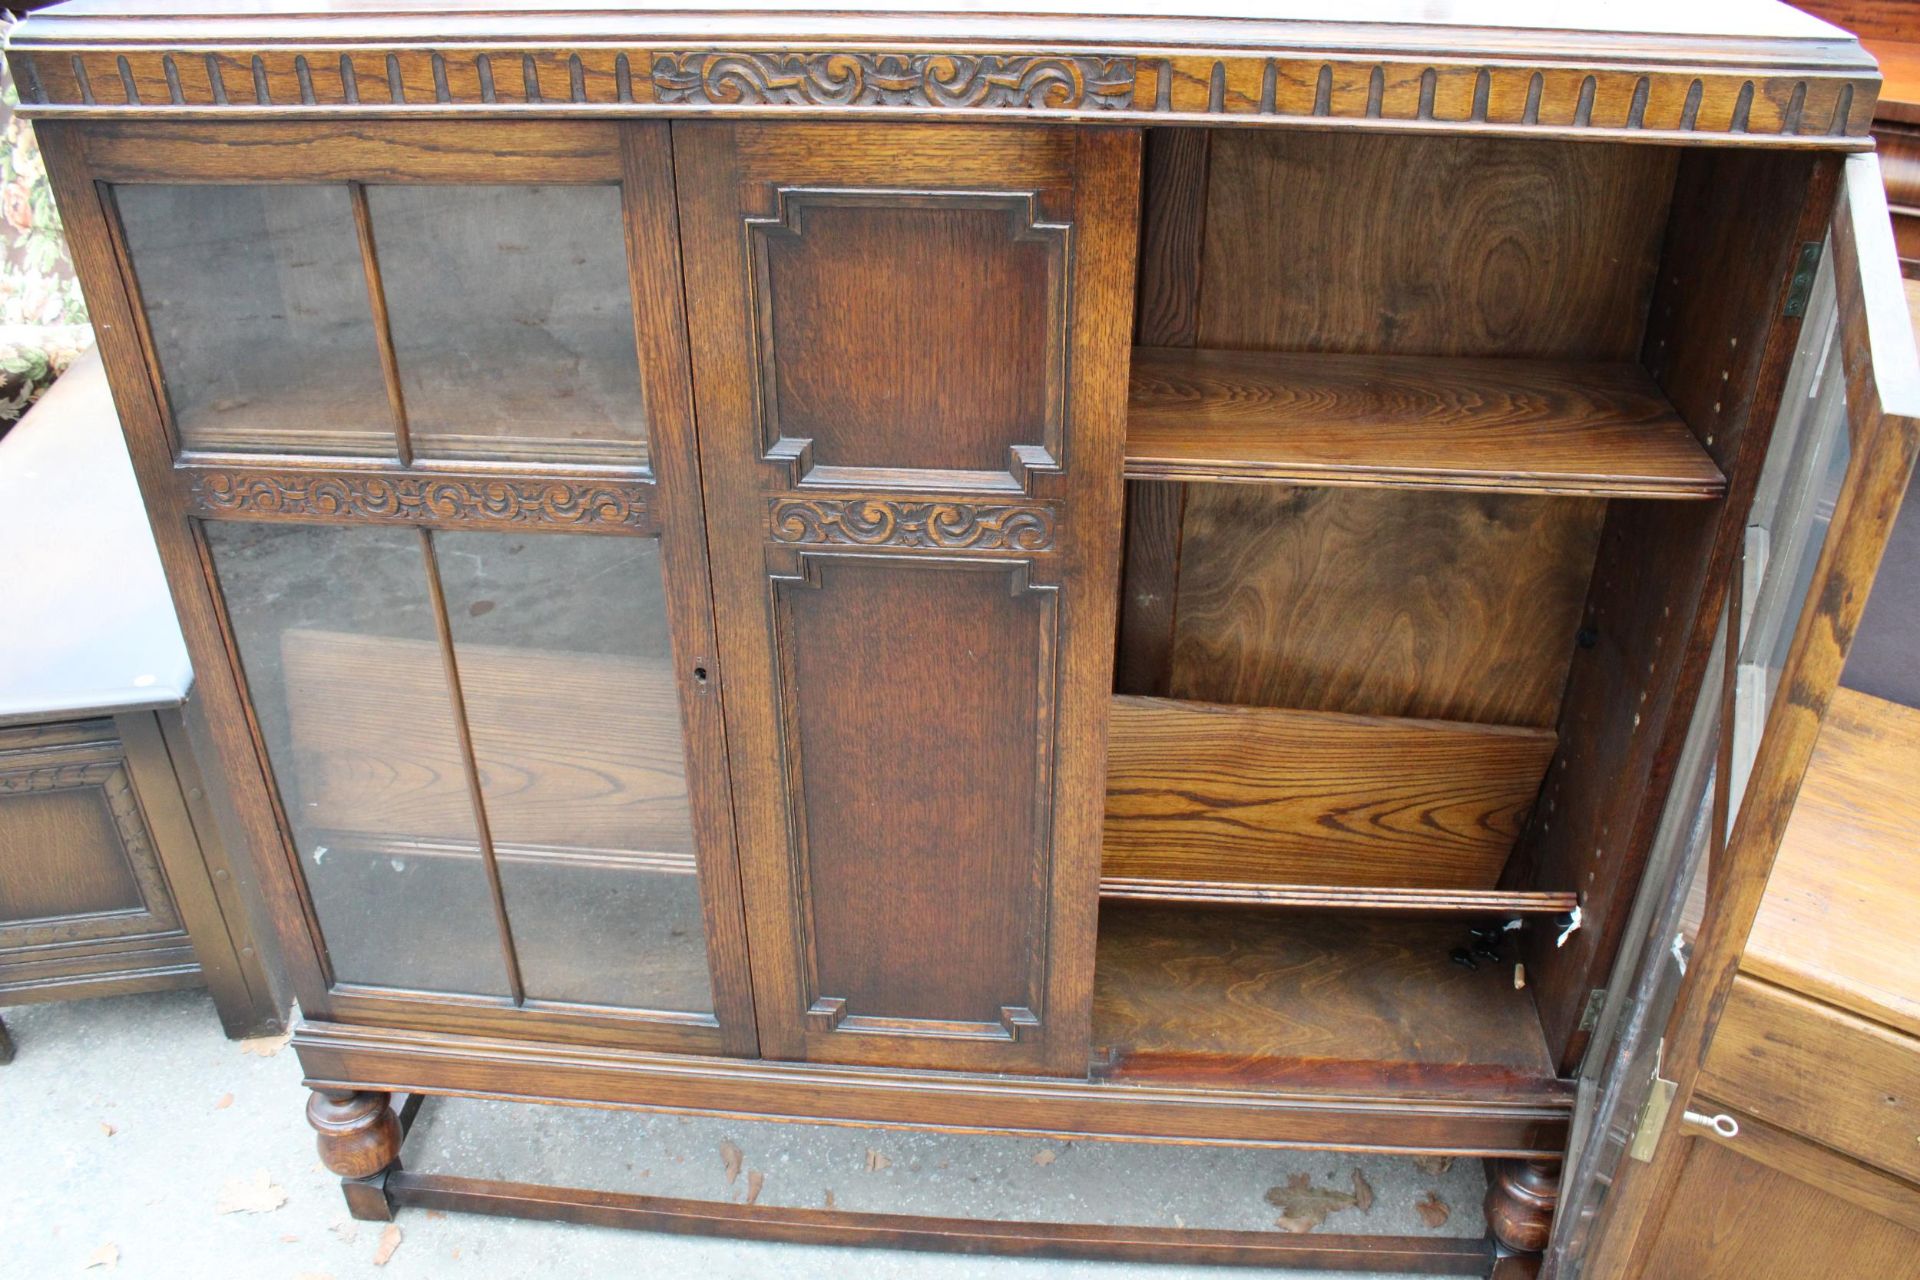 AN EARLY 20TH CENTURY OAK TWO DOOR DISPLAY CABINET ON OPEN BASE WITH TURNED FRONT LEGS, 48" WIDE - Image 3 of 3